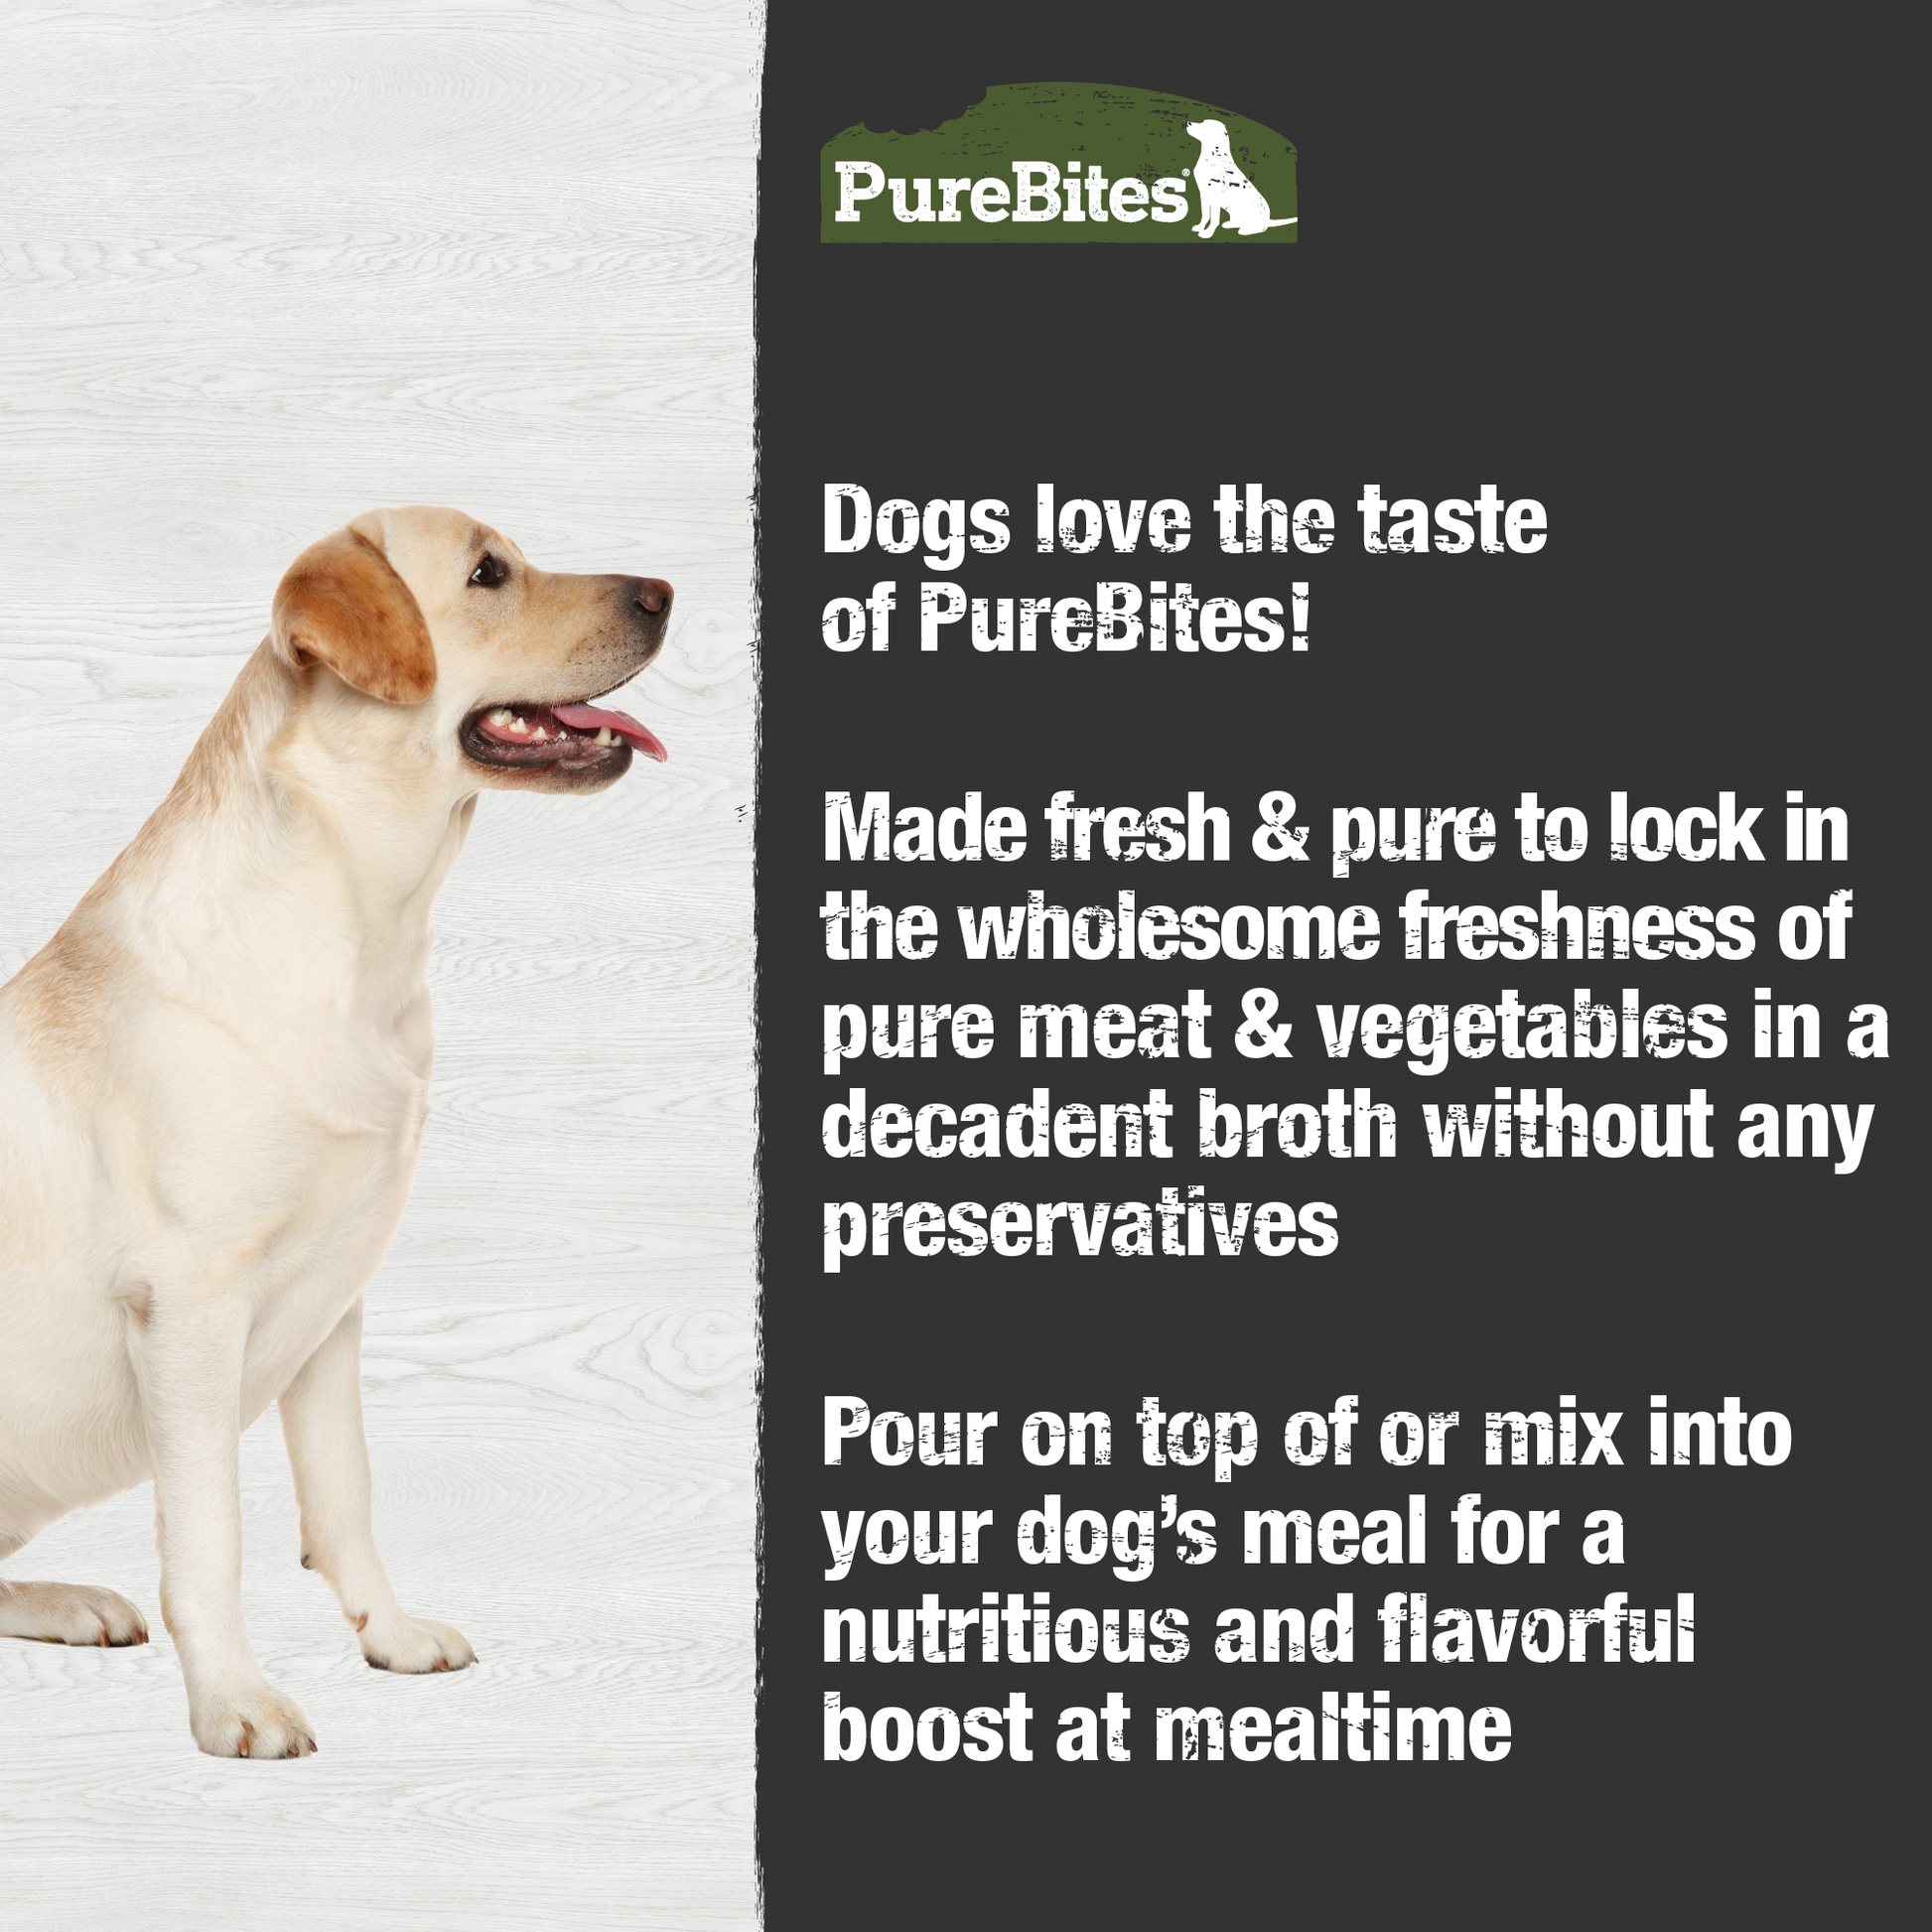 Made fresh & pure means more protein and nutrients packed into every pouch. With only chicken, beef, and vegetables in a rich broth, it provides superior nutrition and mirrors a dog's ancestral diet.